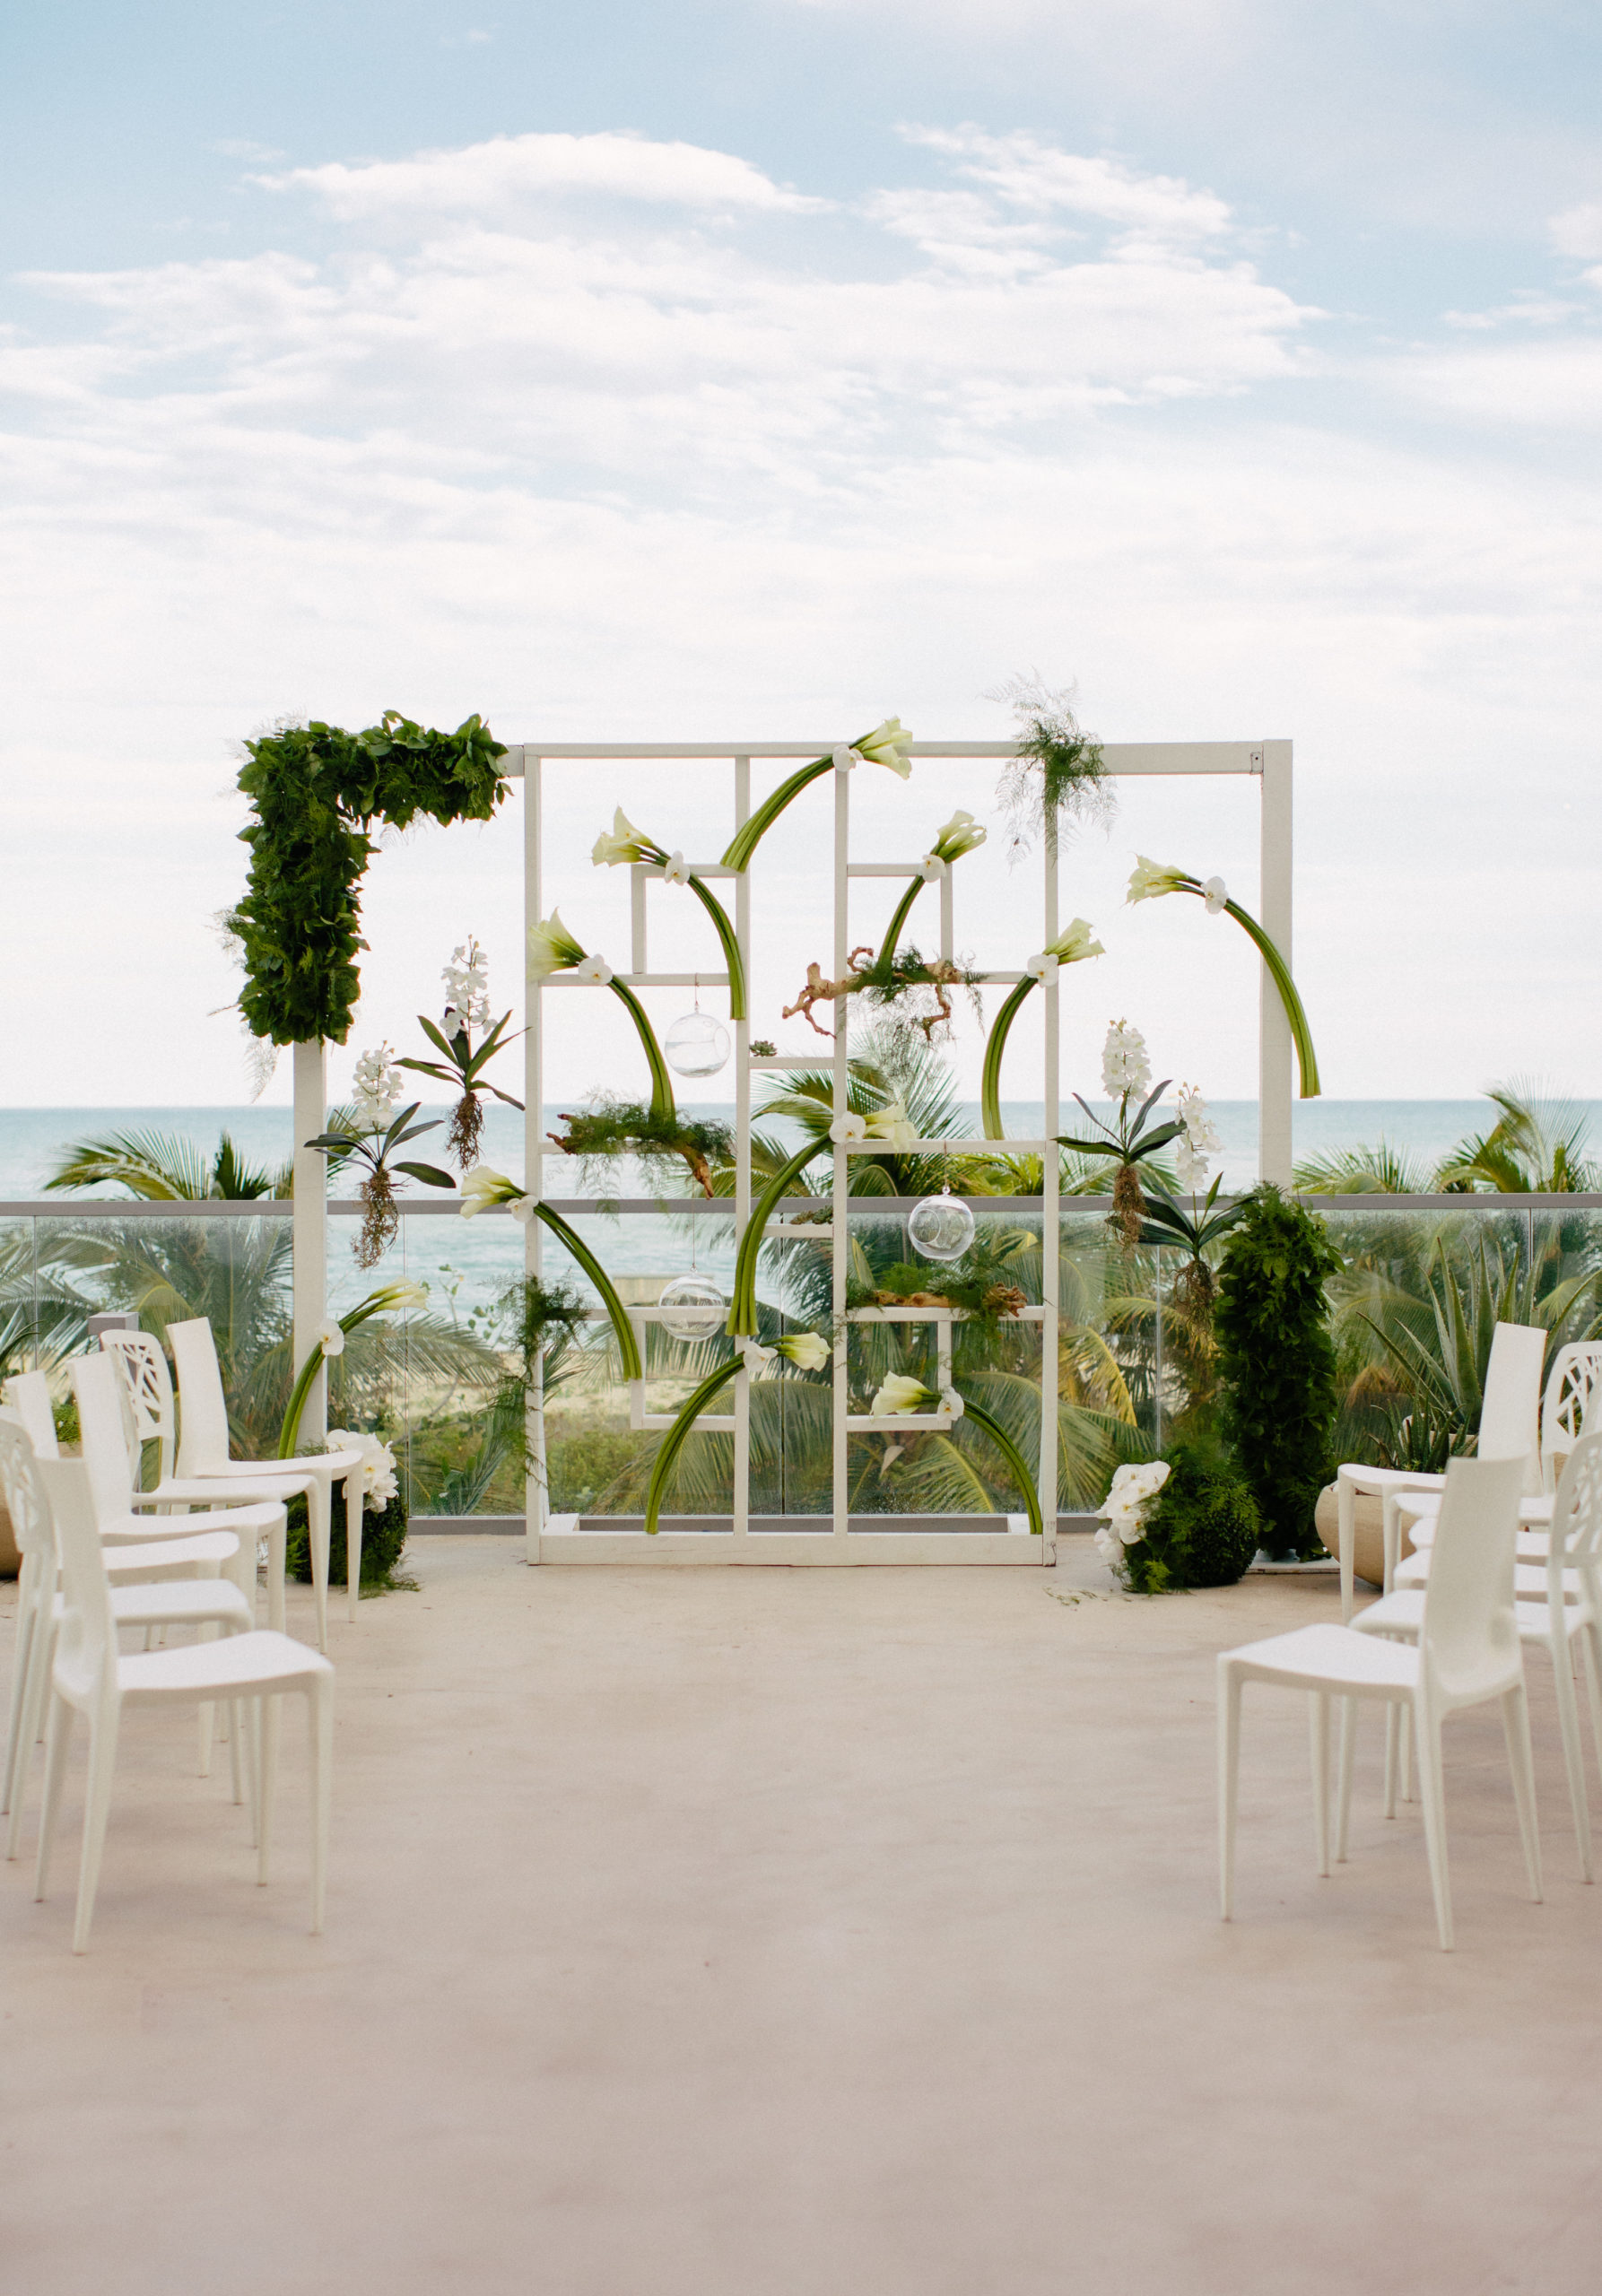 A Unique ceremony setup placed guest chairs around the couple to form an open circle encasing the couple and showcasing the custom ceremony structure with calla lilies, orchids, and greenery at the 1 Hotel South Beach